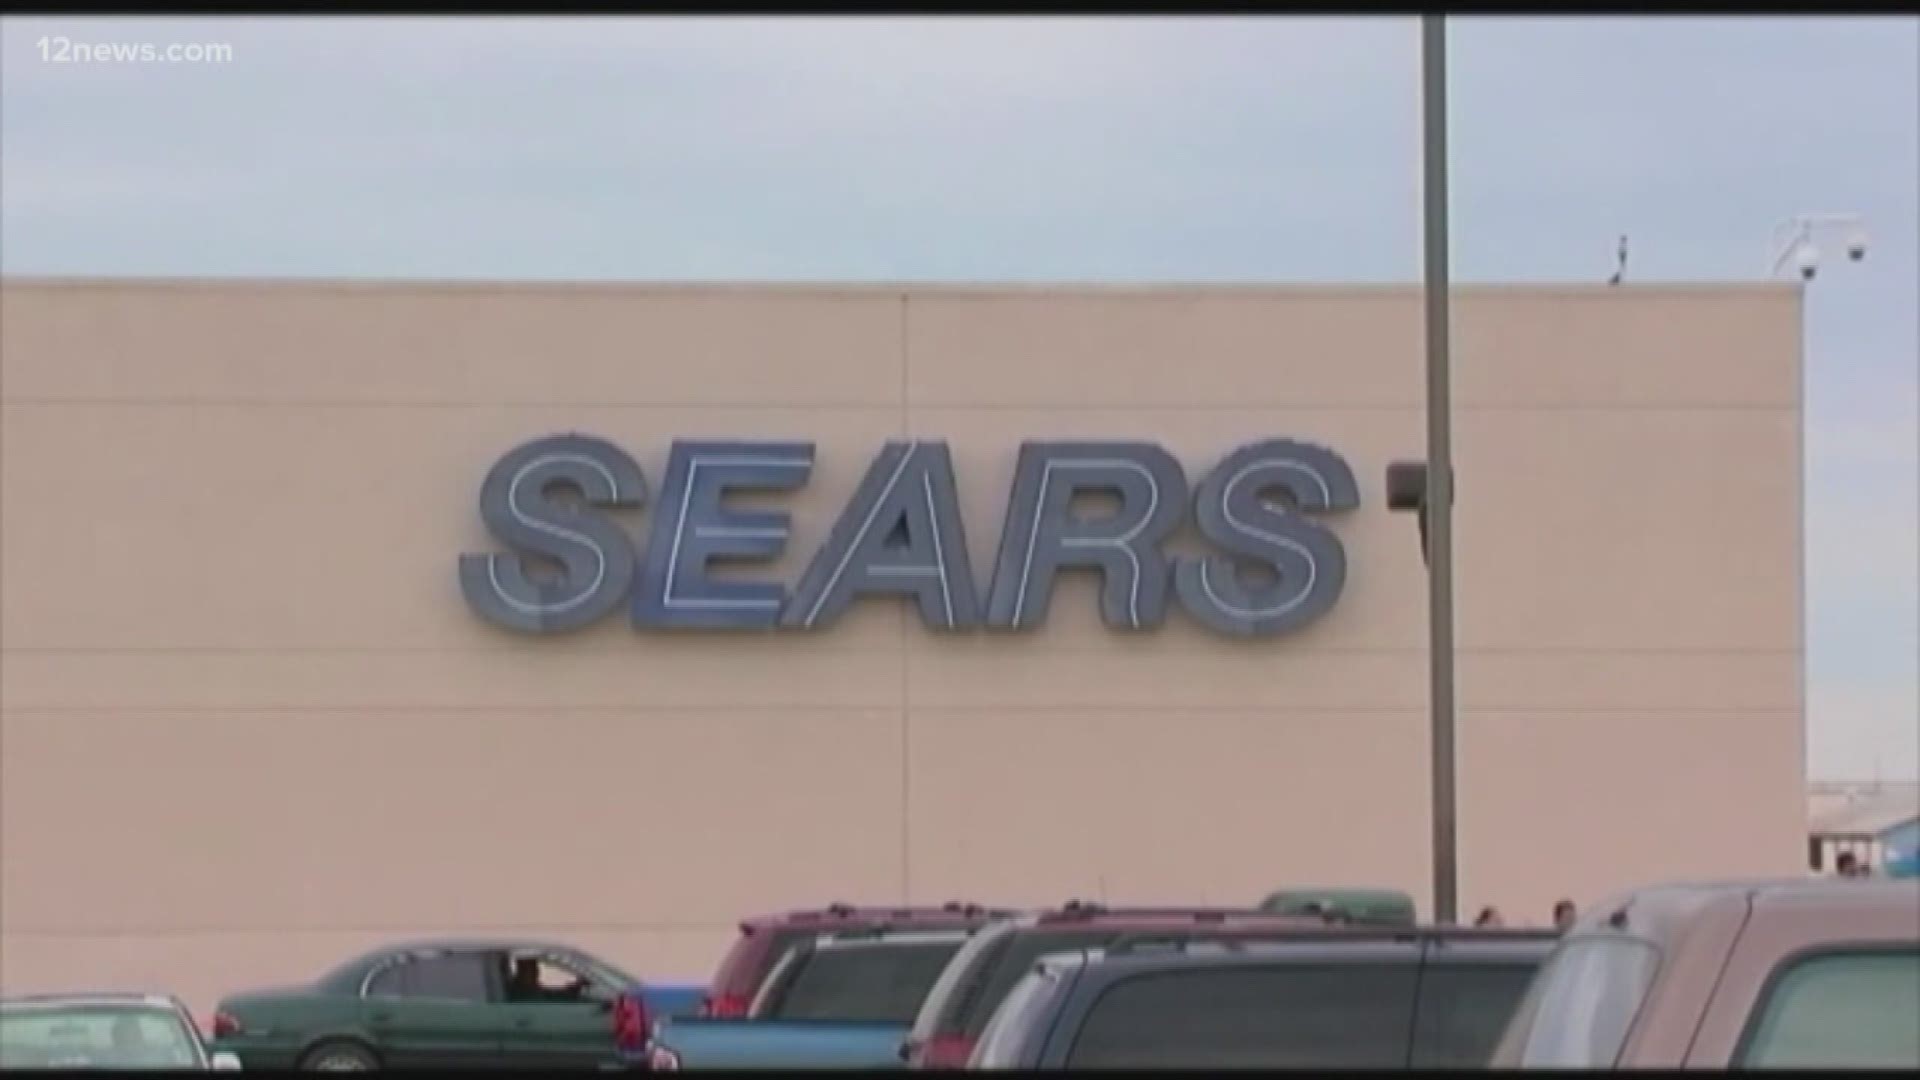 Sears is filing chapter 11 bankruptcy and that means 142 stores are closing across the country. Five of those locations are in Arizona. We breakdown what the bankruptcy means.